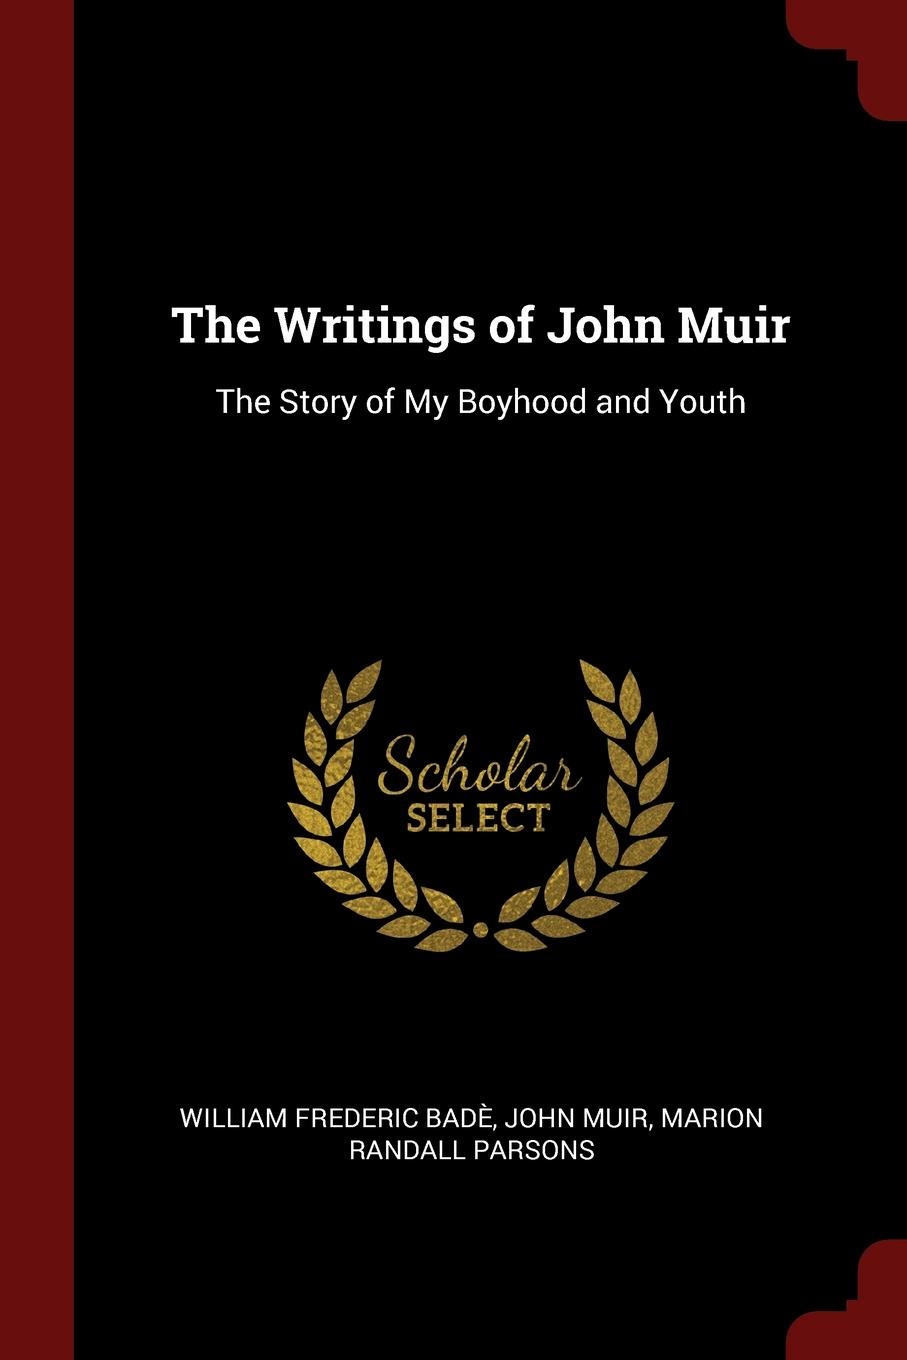 The Writings of John Muir. The Story of My Boyhood and Youth